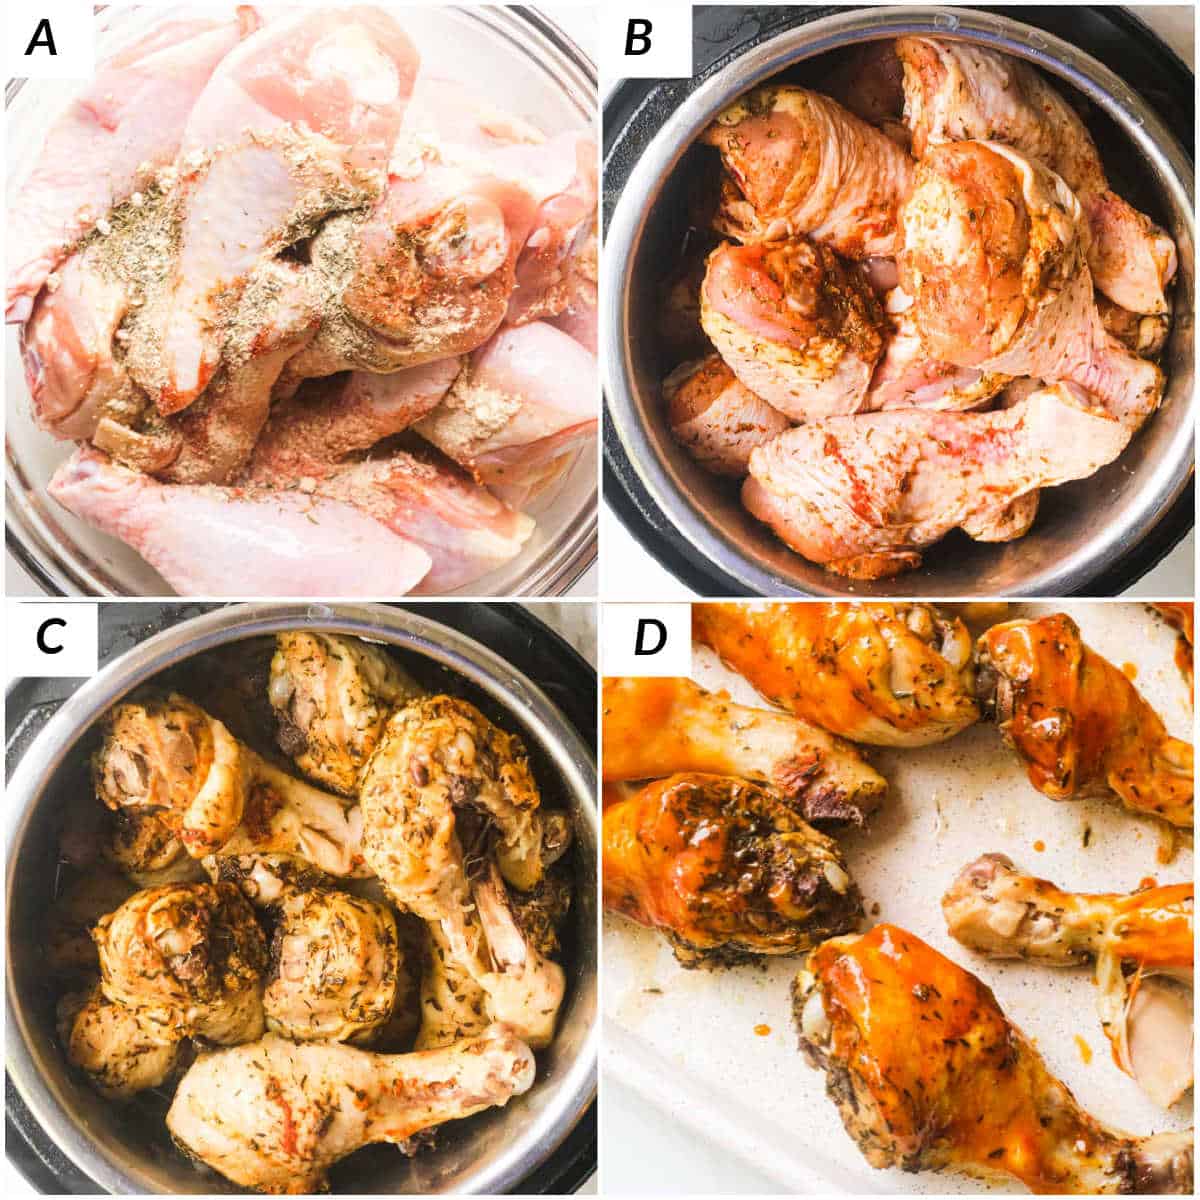 image collage showing the steps for making instant pot chicken drumsticks